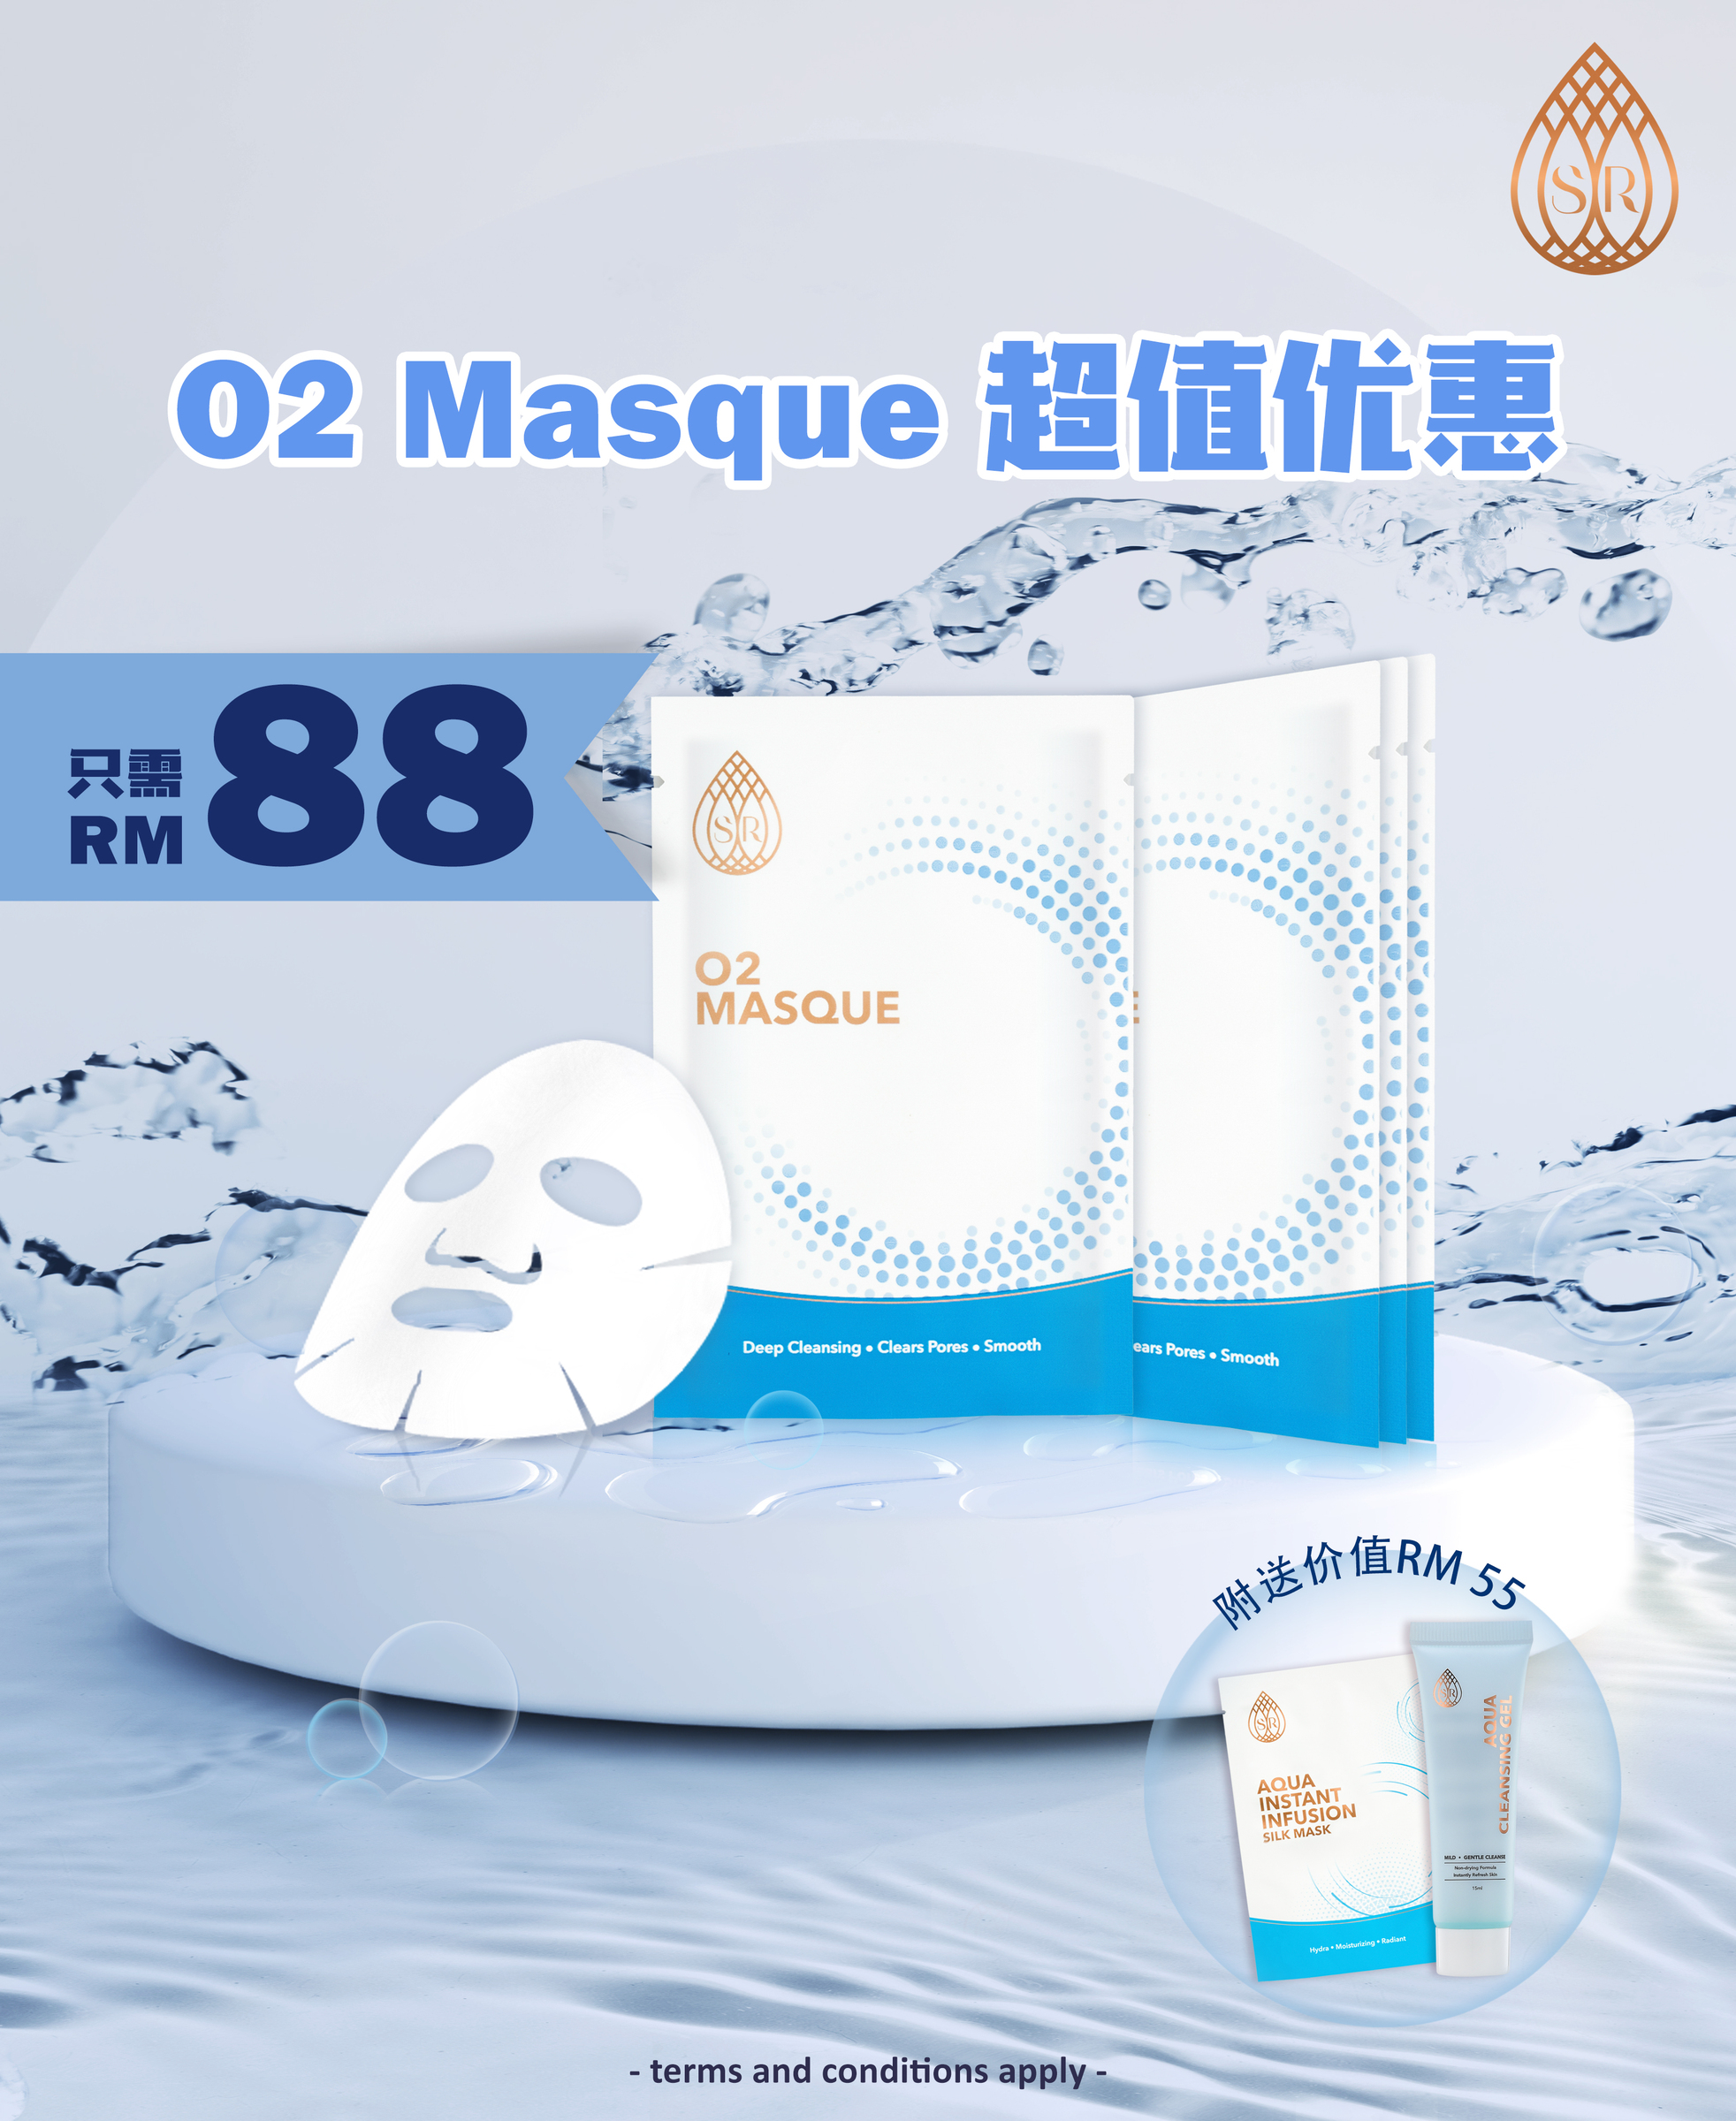 Hot selling promotion package 2 (O2 masque)